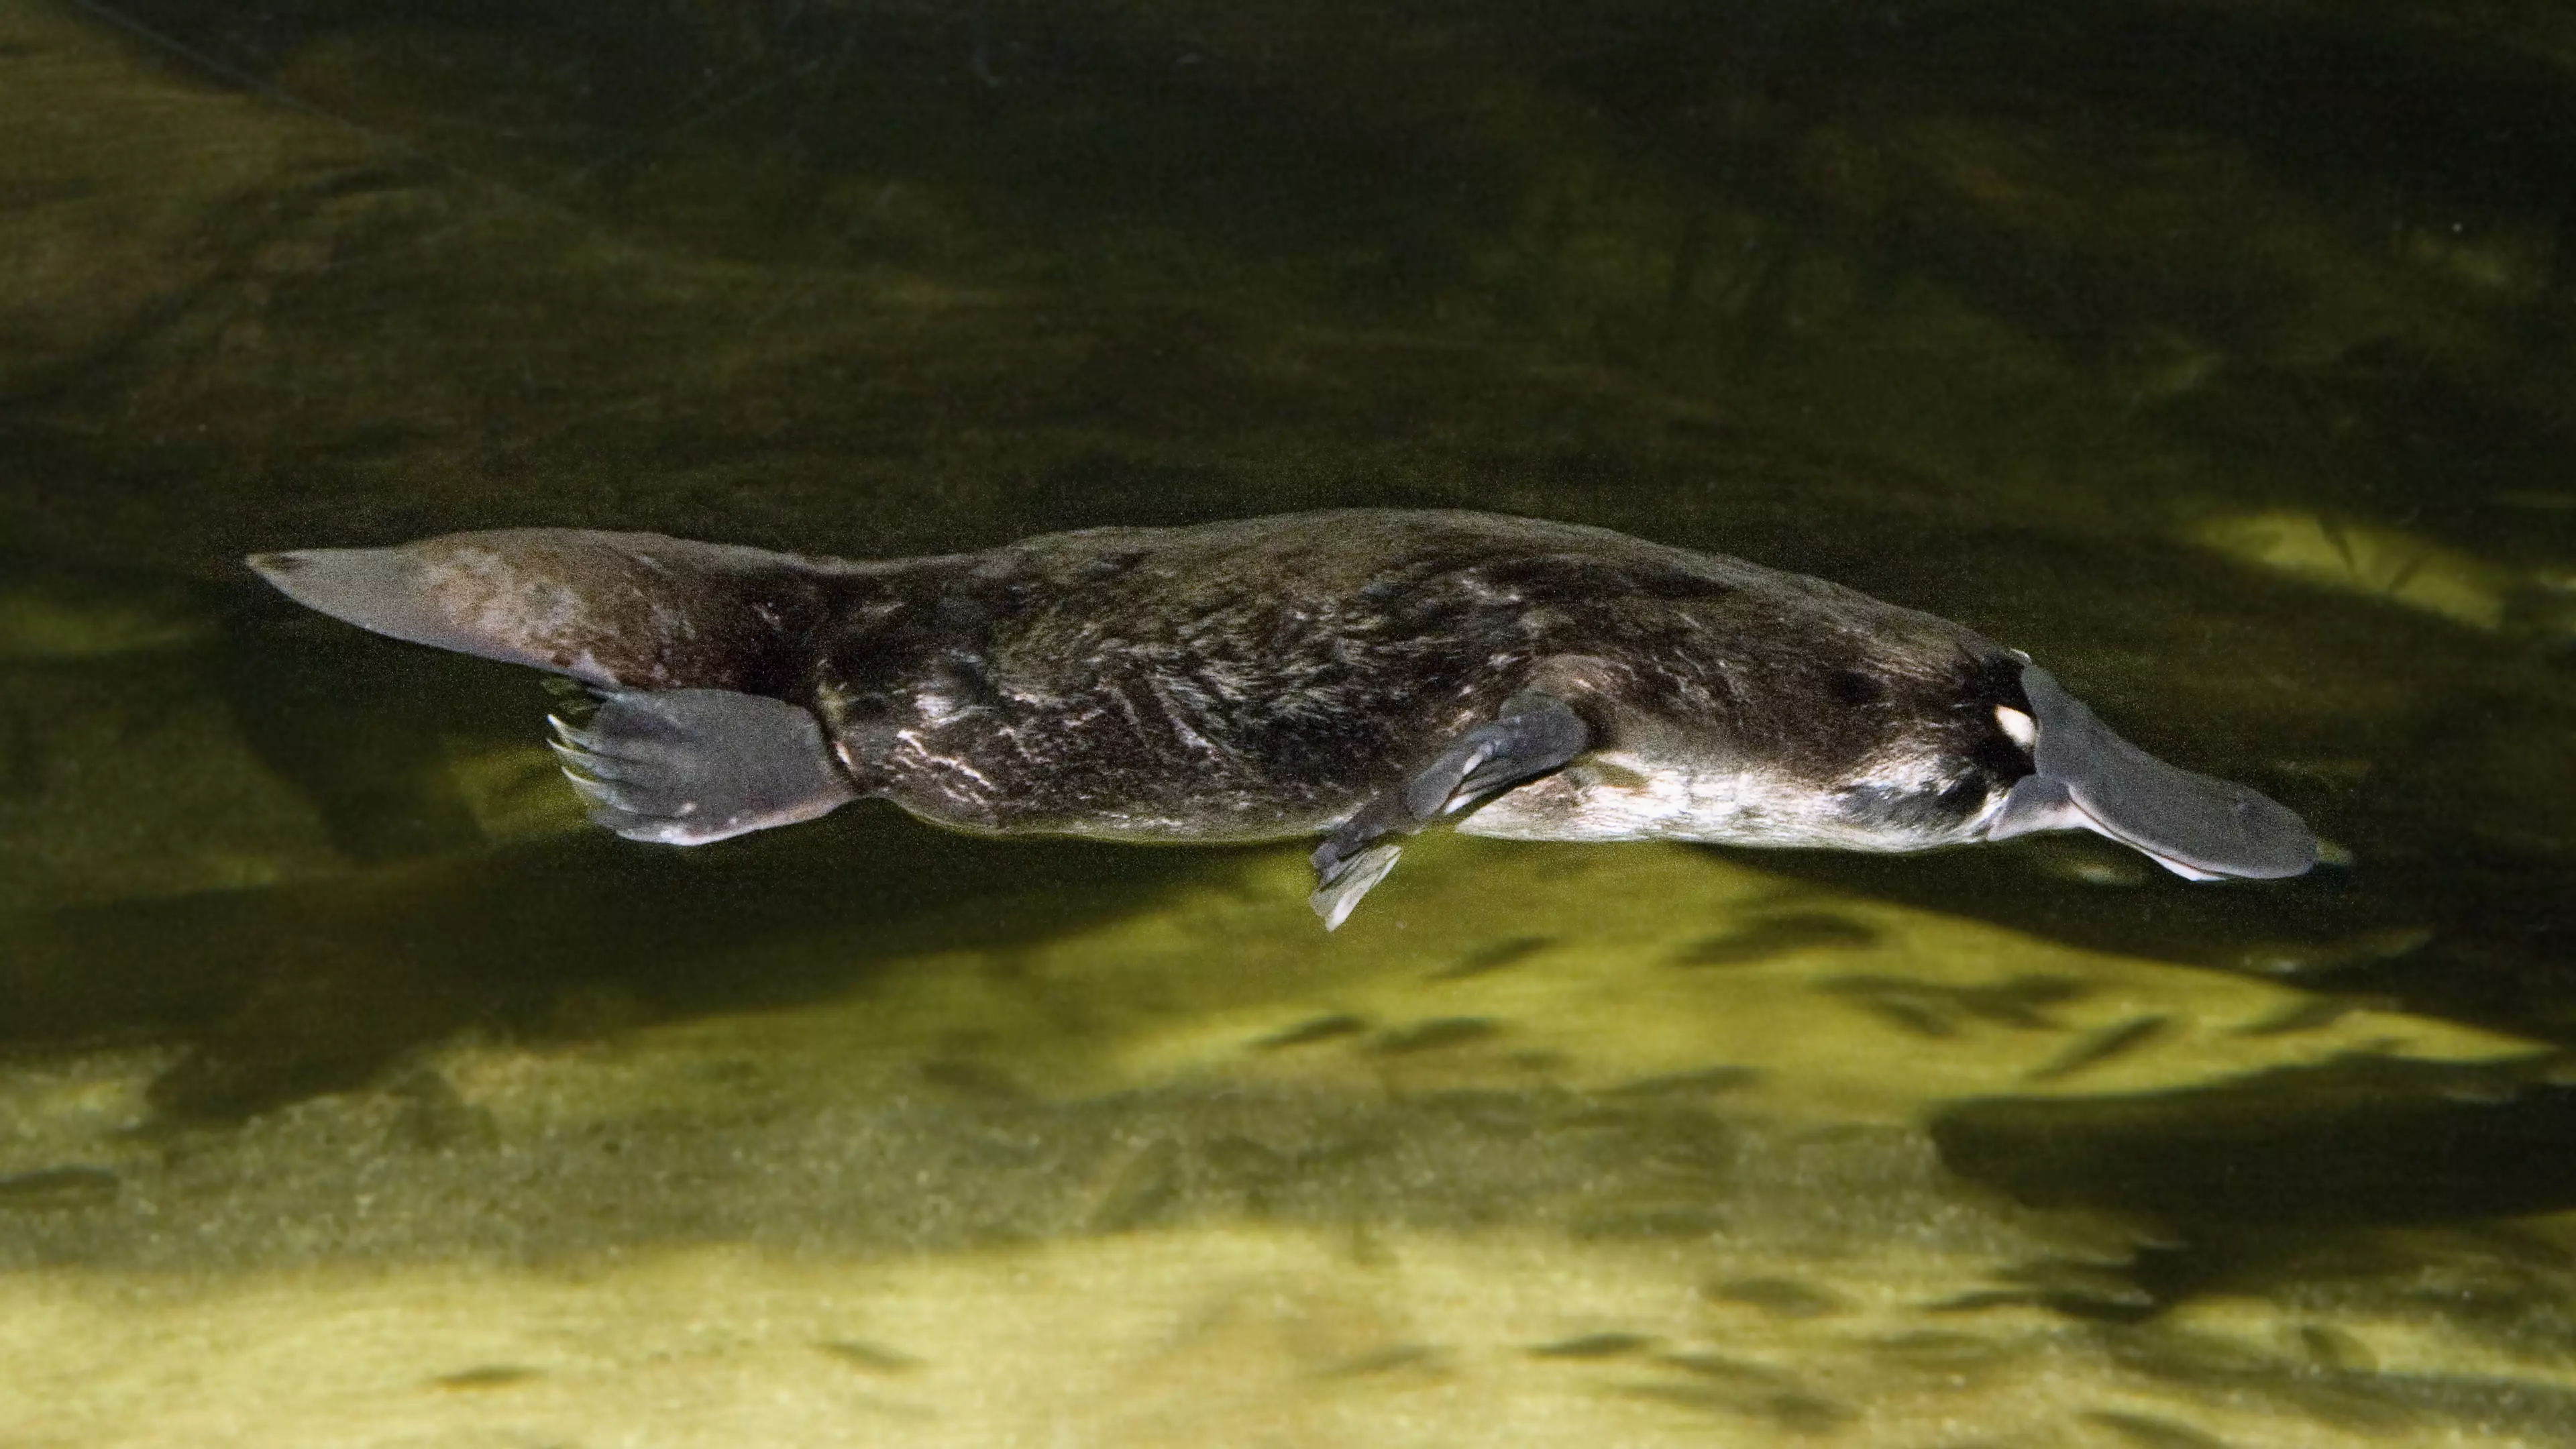 New Figures Warn The Platypus Is Heading Towards The ‘Brink Of Extinction’